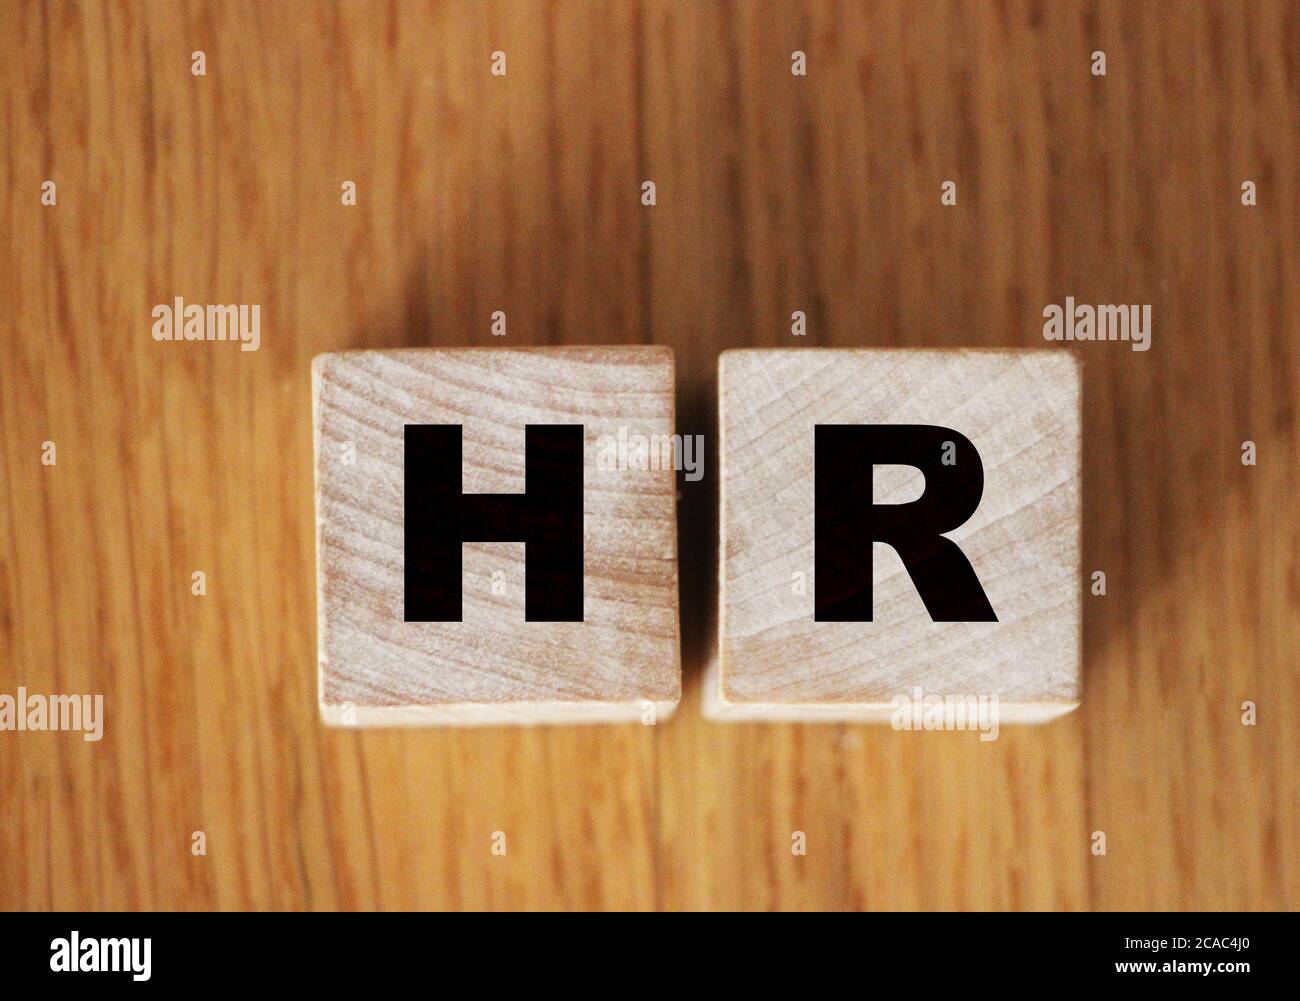 HR abbreviation on wooden blocks. Human Resources career business concept Stock Photo